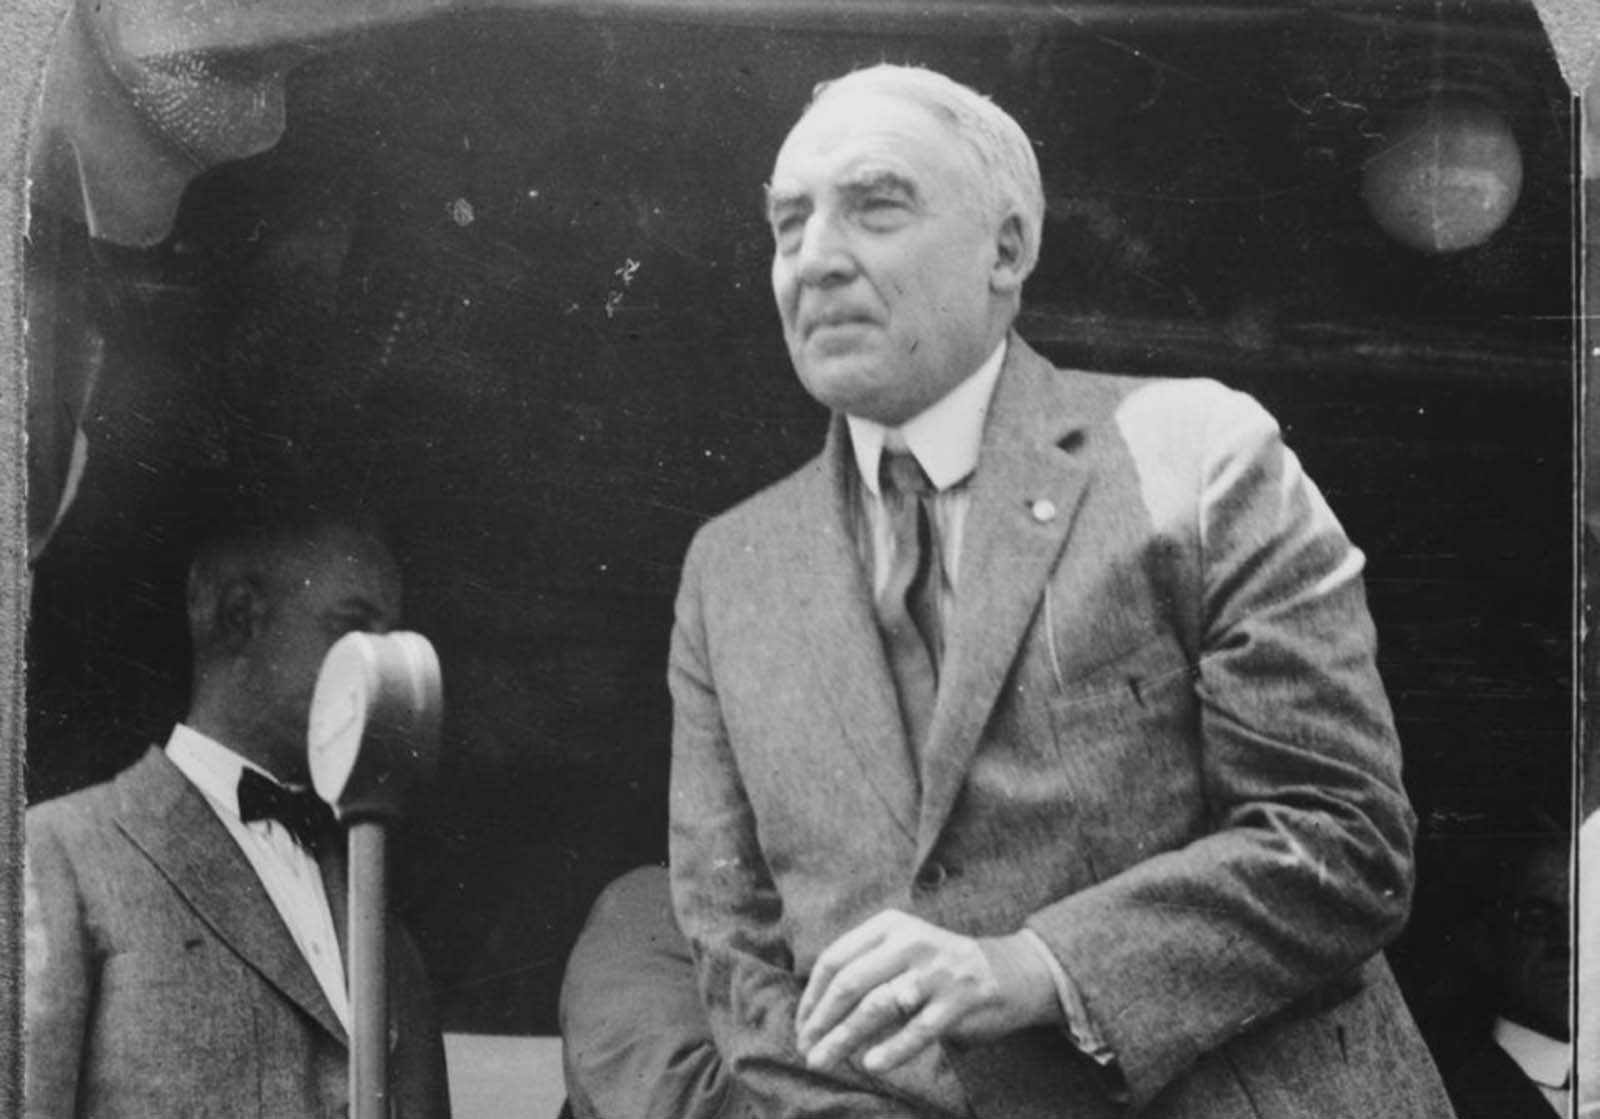 Why U.S. presidential candidate Warren Harding campaigned on a “return to normalcy”? What exactly was so abnormal in 1920?